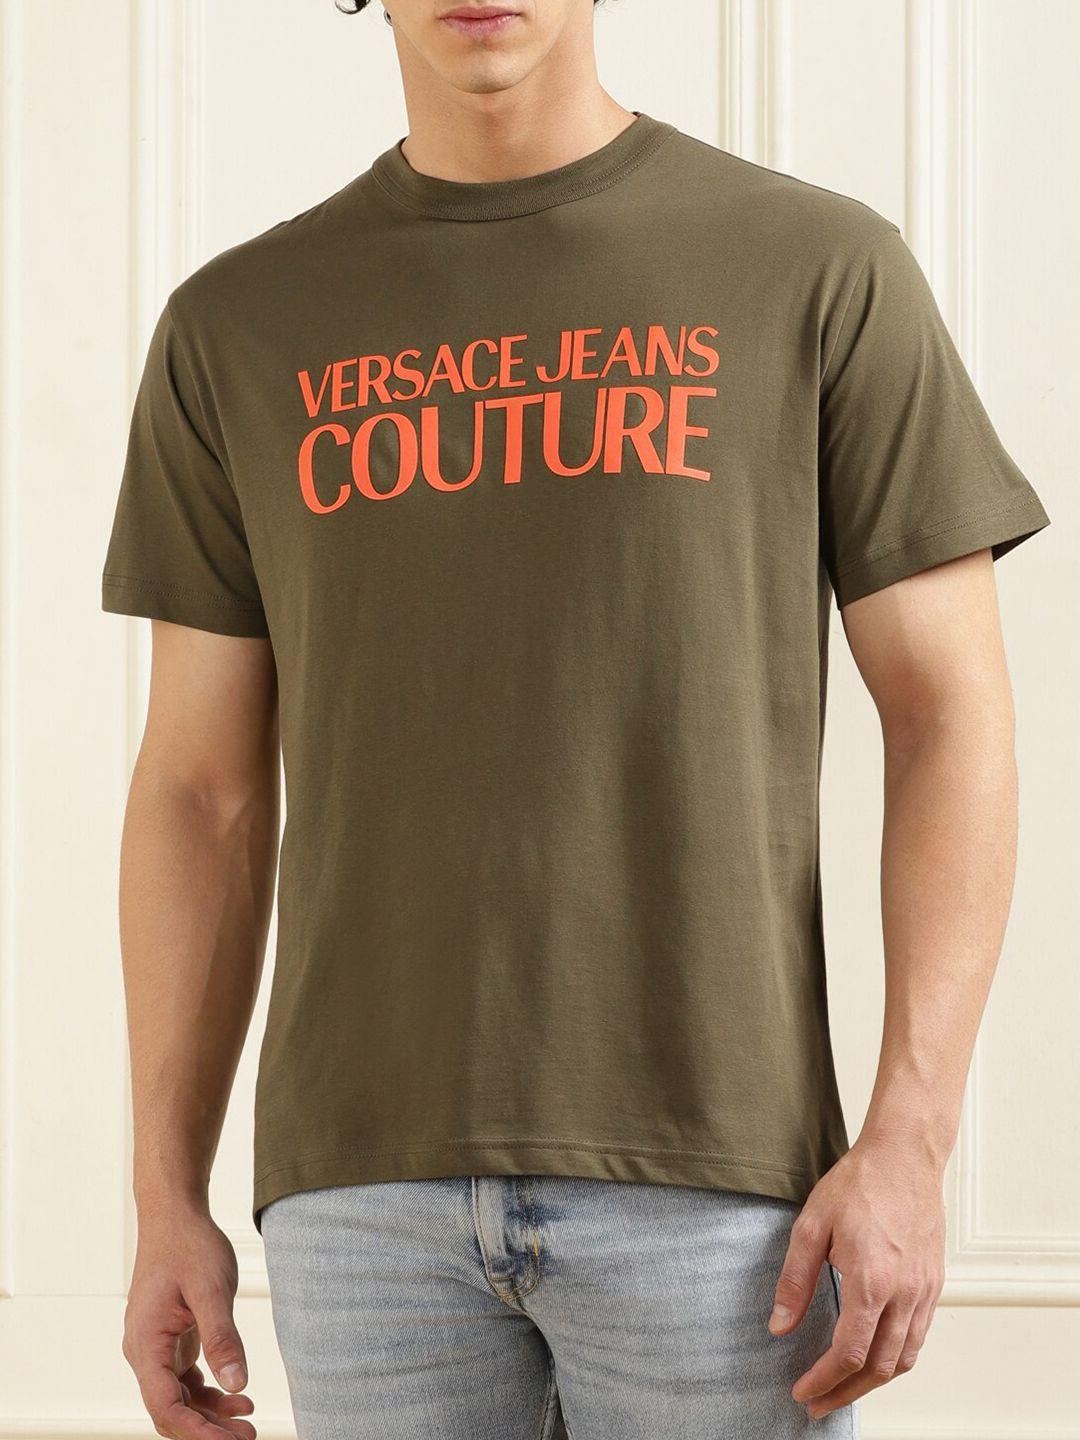 versace jeans couture men green typography printed v-neck pockets t-shirt